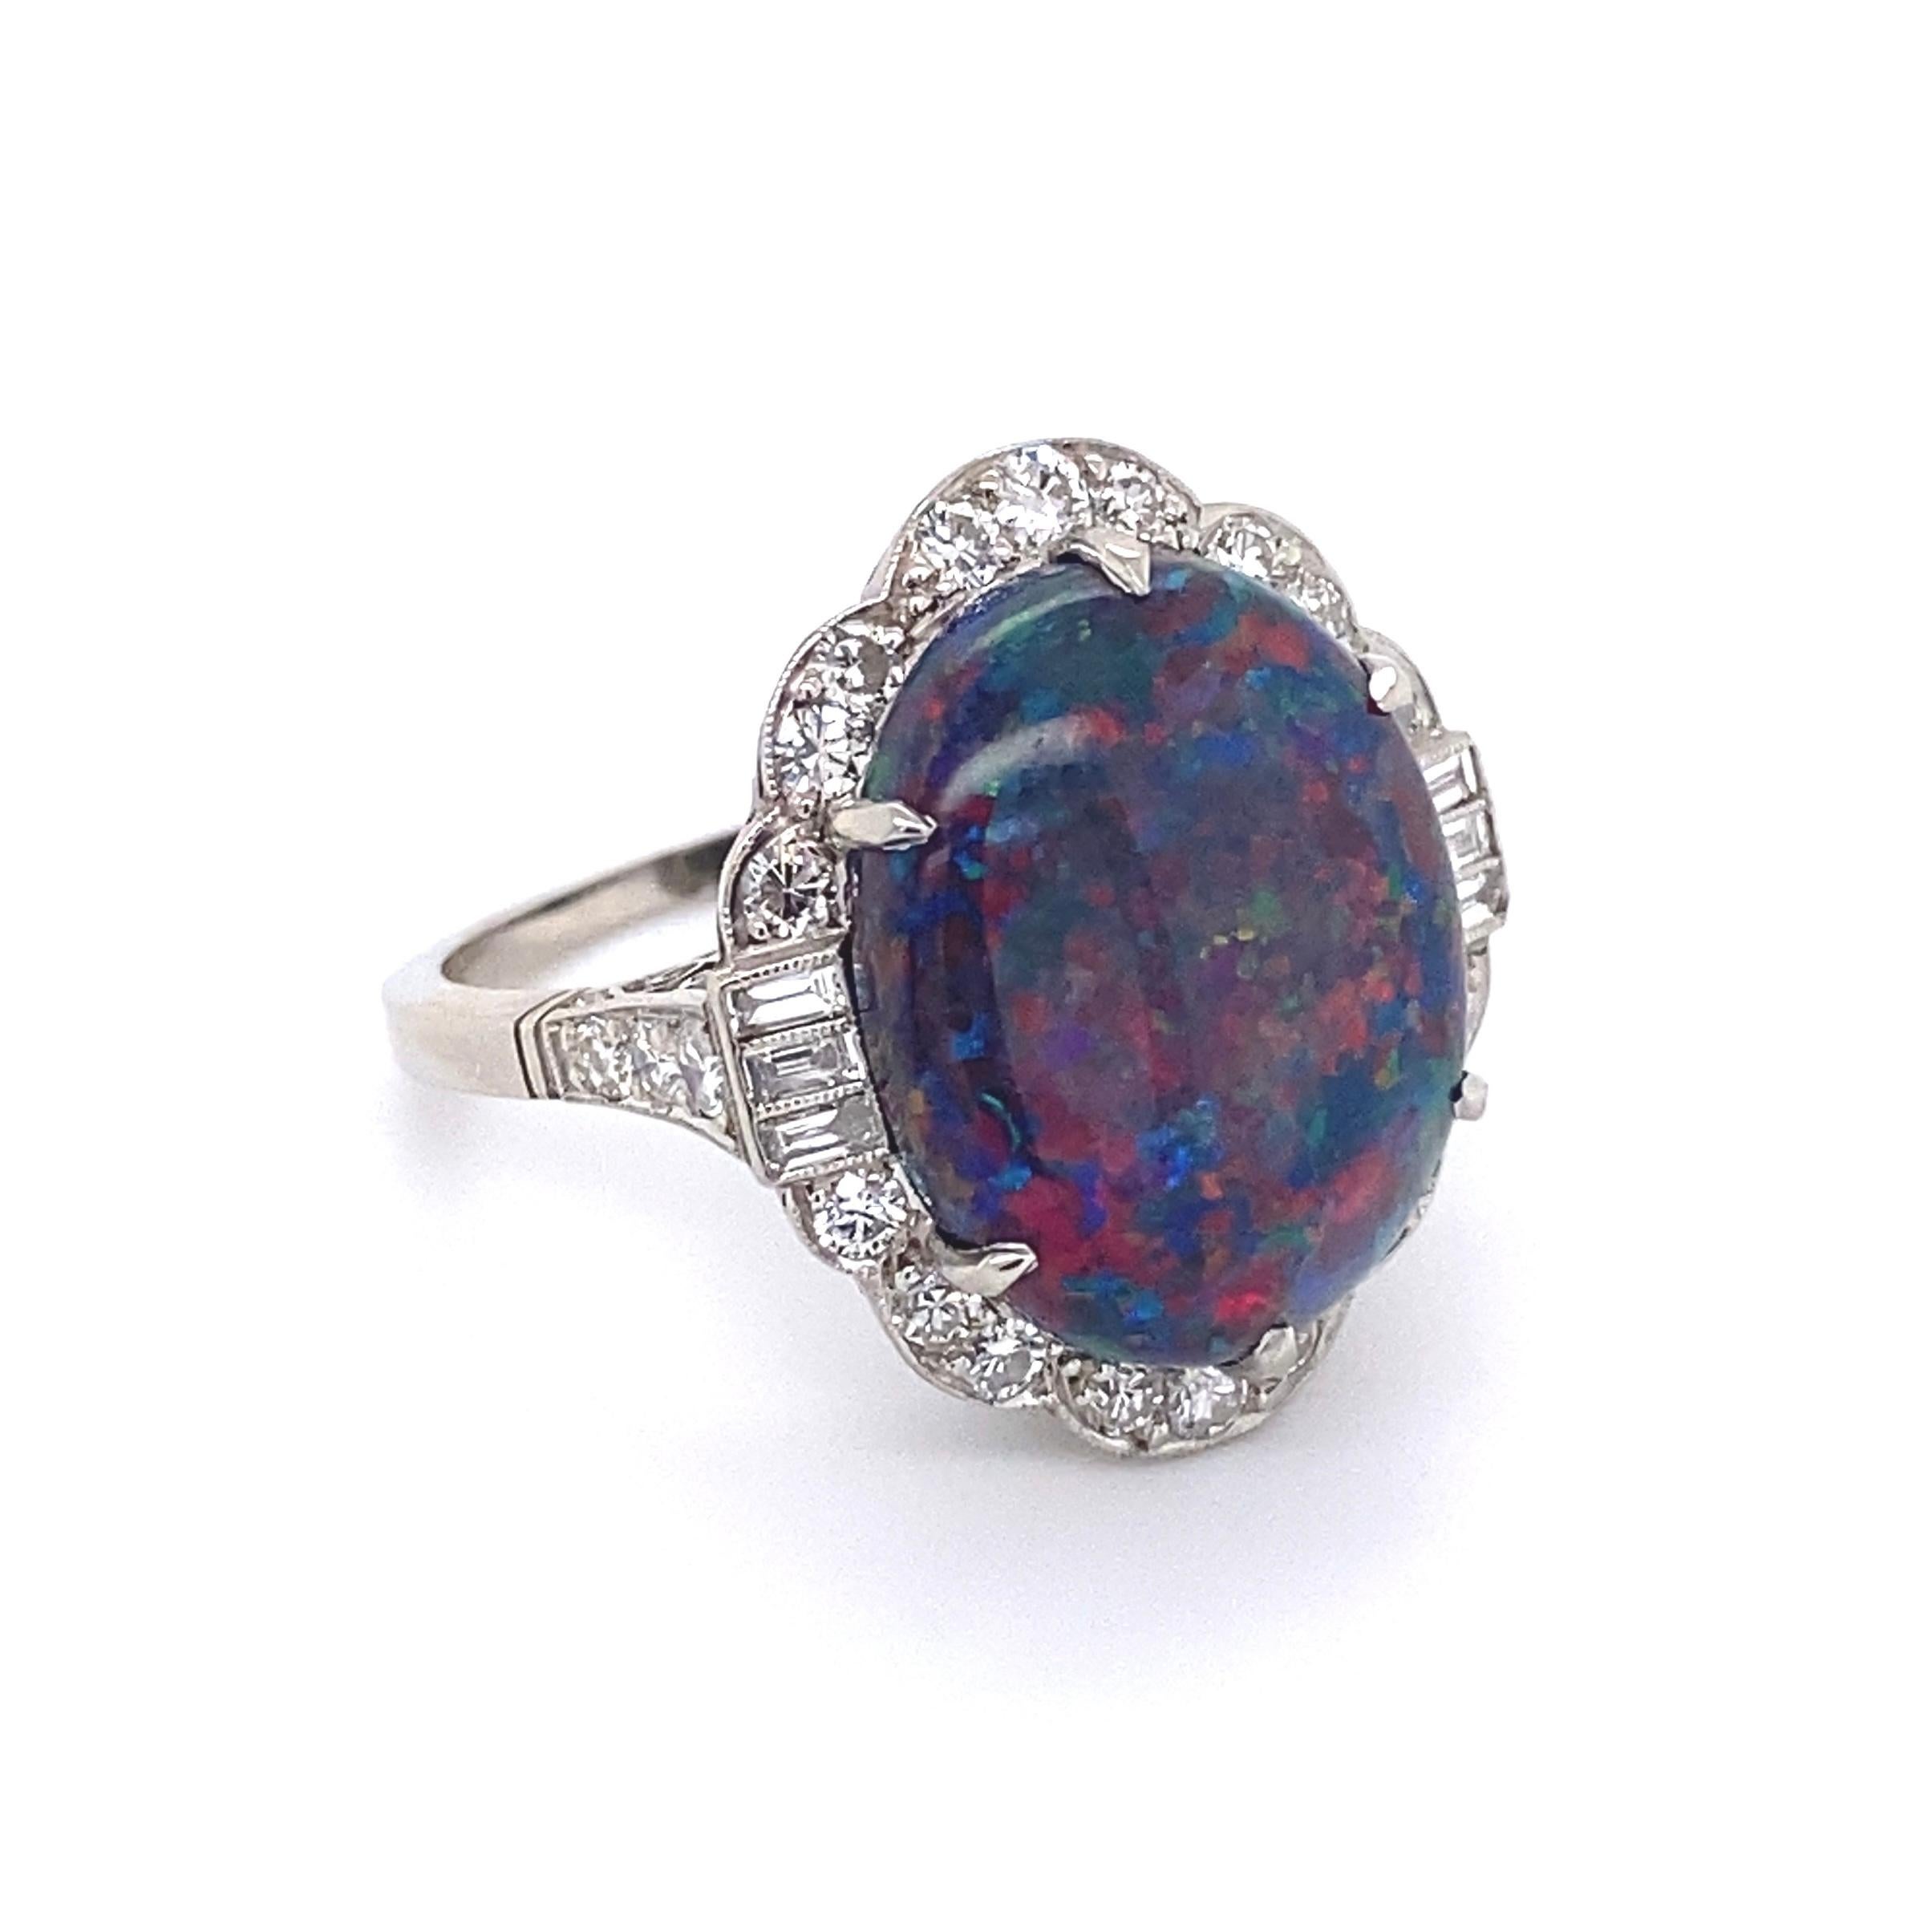 Simply Beautiful!  Finely detailed Black Opal and Diamond Cocktail Ring. Centering a securely nestled Hand set 7.78 Carat Oval Symmetrical Australian Lightning Ridge Black Opal surrounded by Old Round-Cut and Baguette Diamonds, weighing approx.